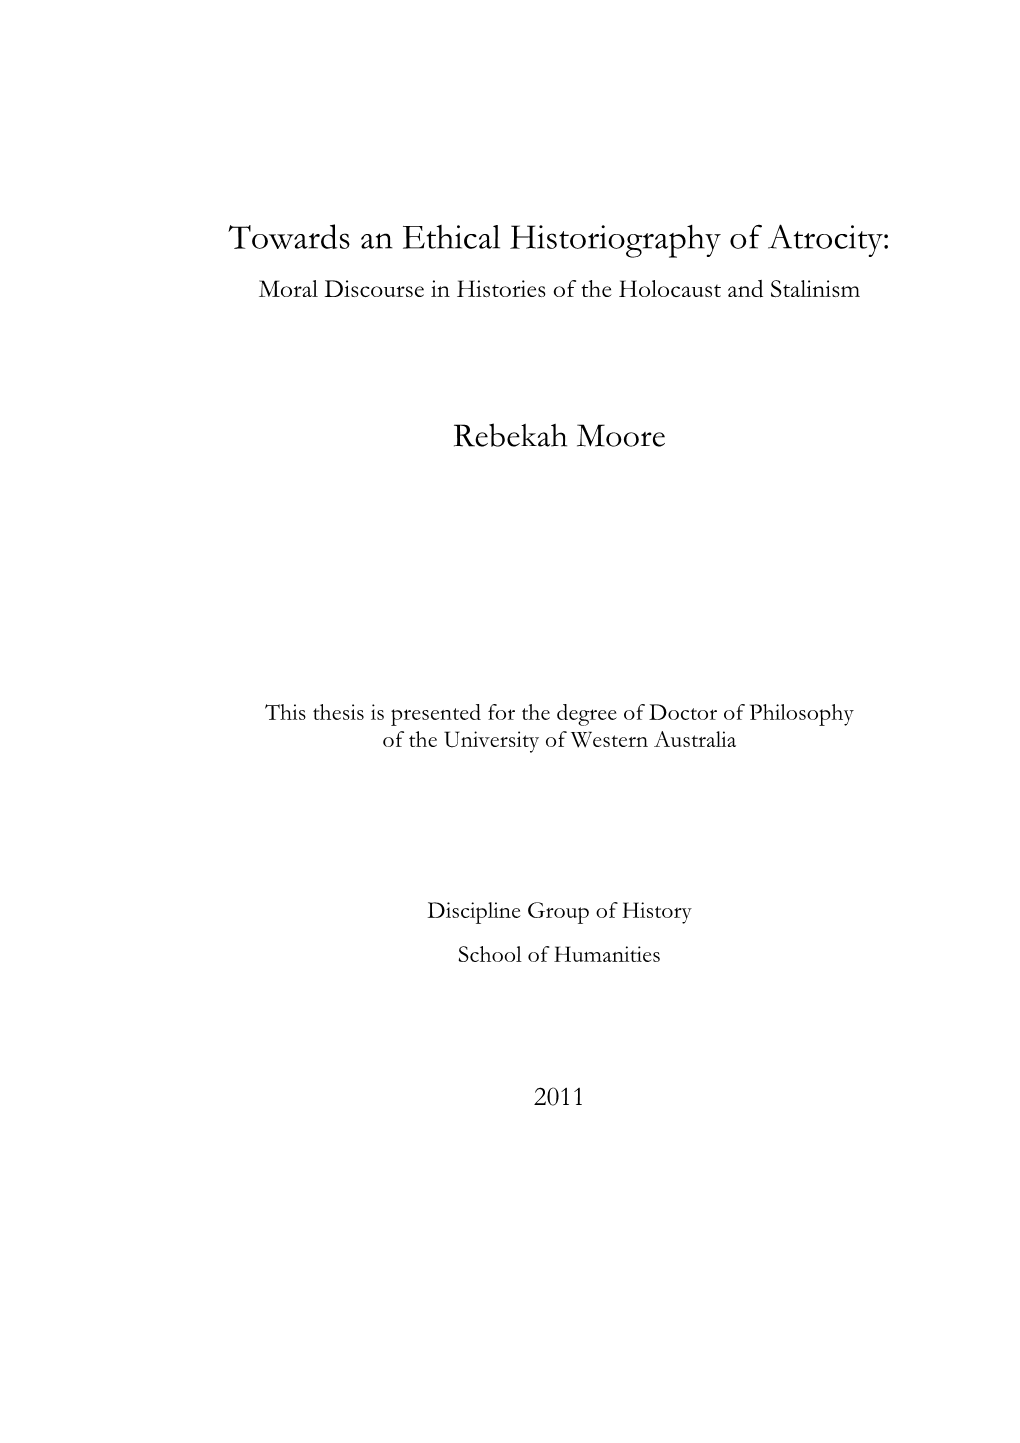 Towards an Ethical Historiography of Atrocity: Moral Discourse in Histories of the Holocaust and Stalinism